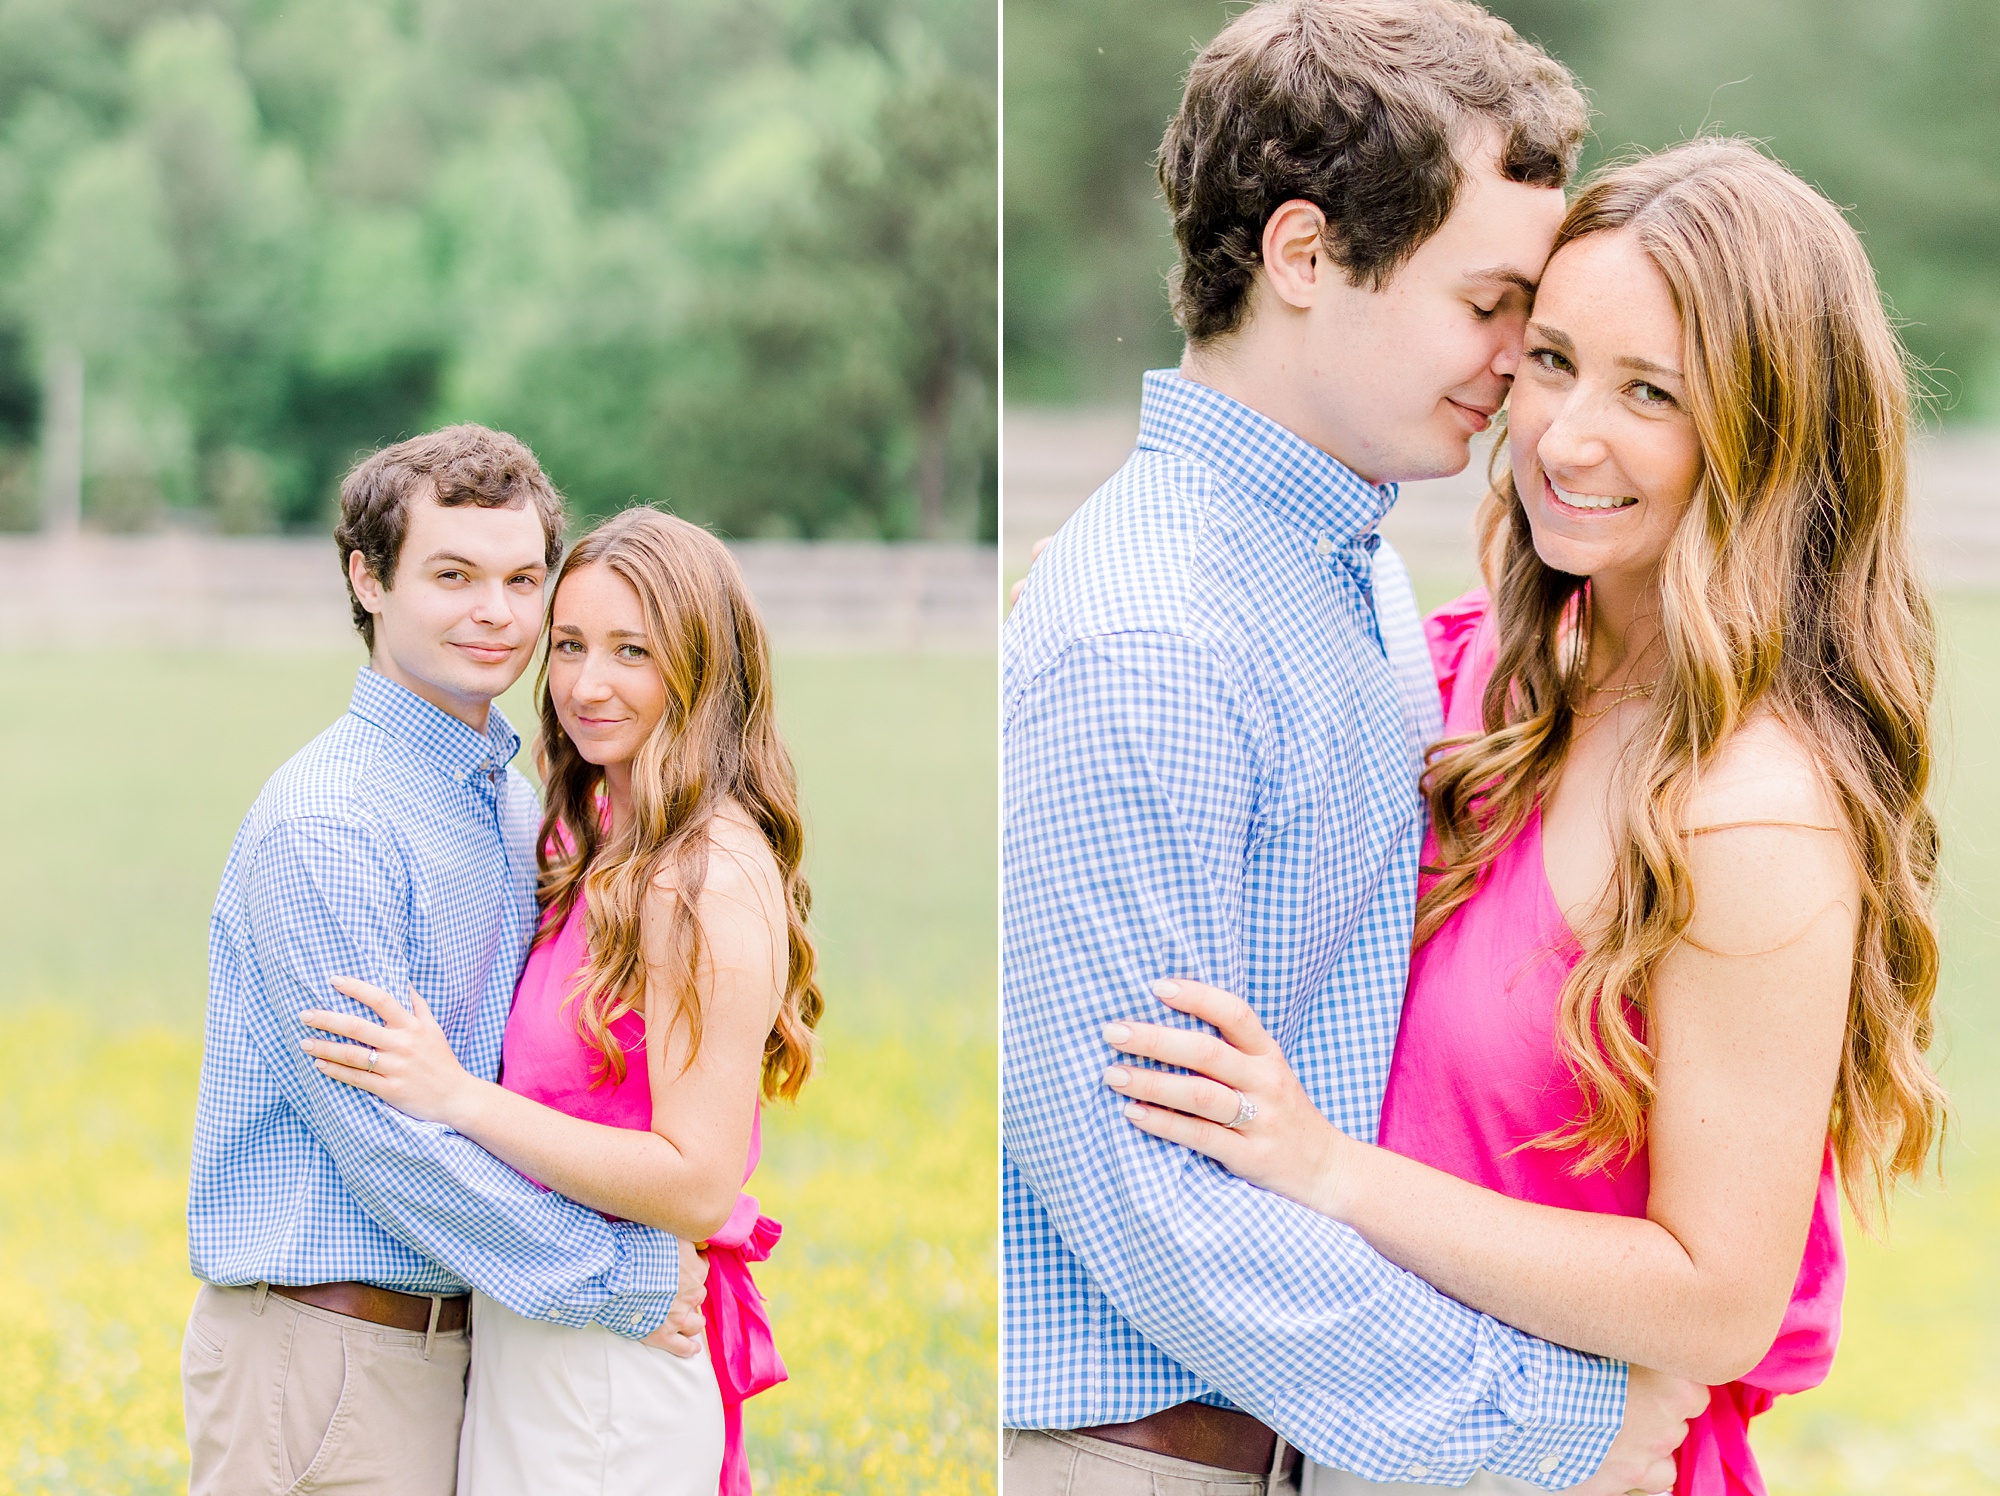 spring Birmingham AL engagement session with couple in field of yellow flowers